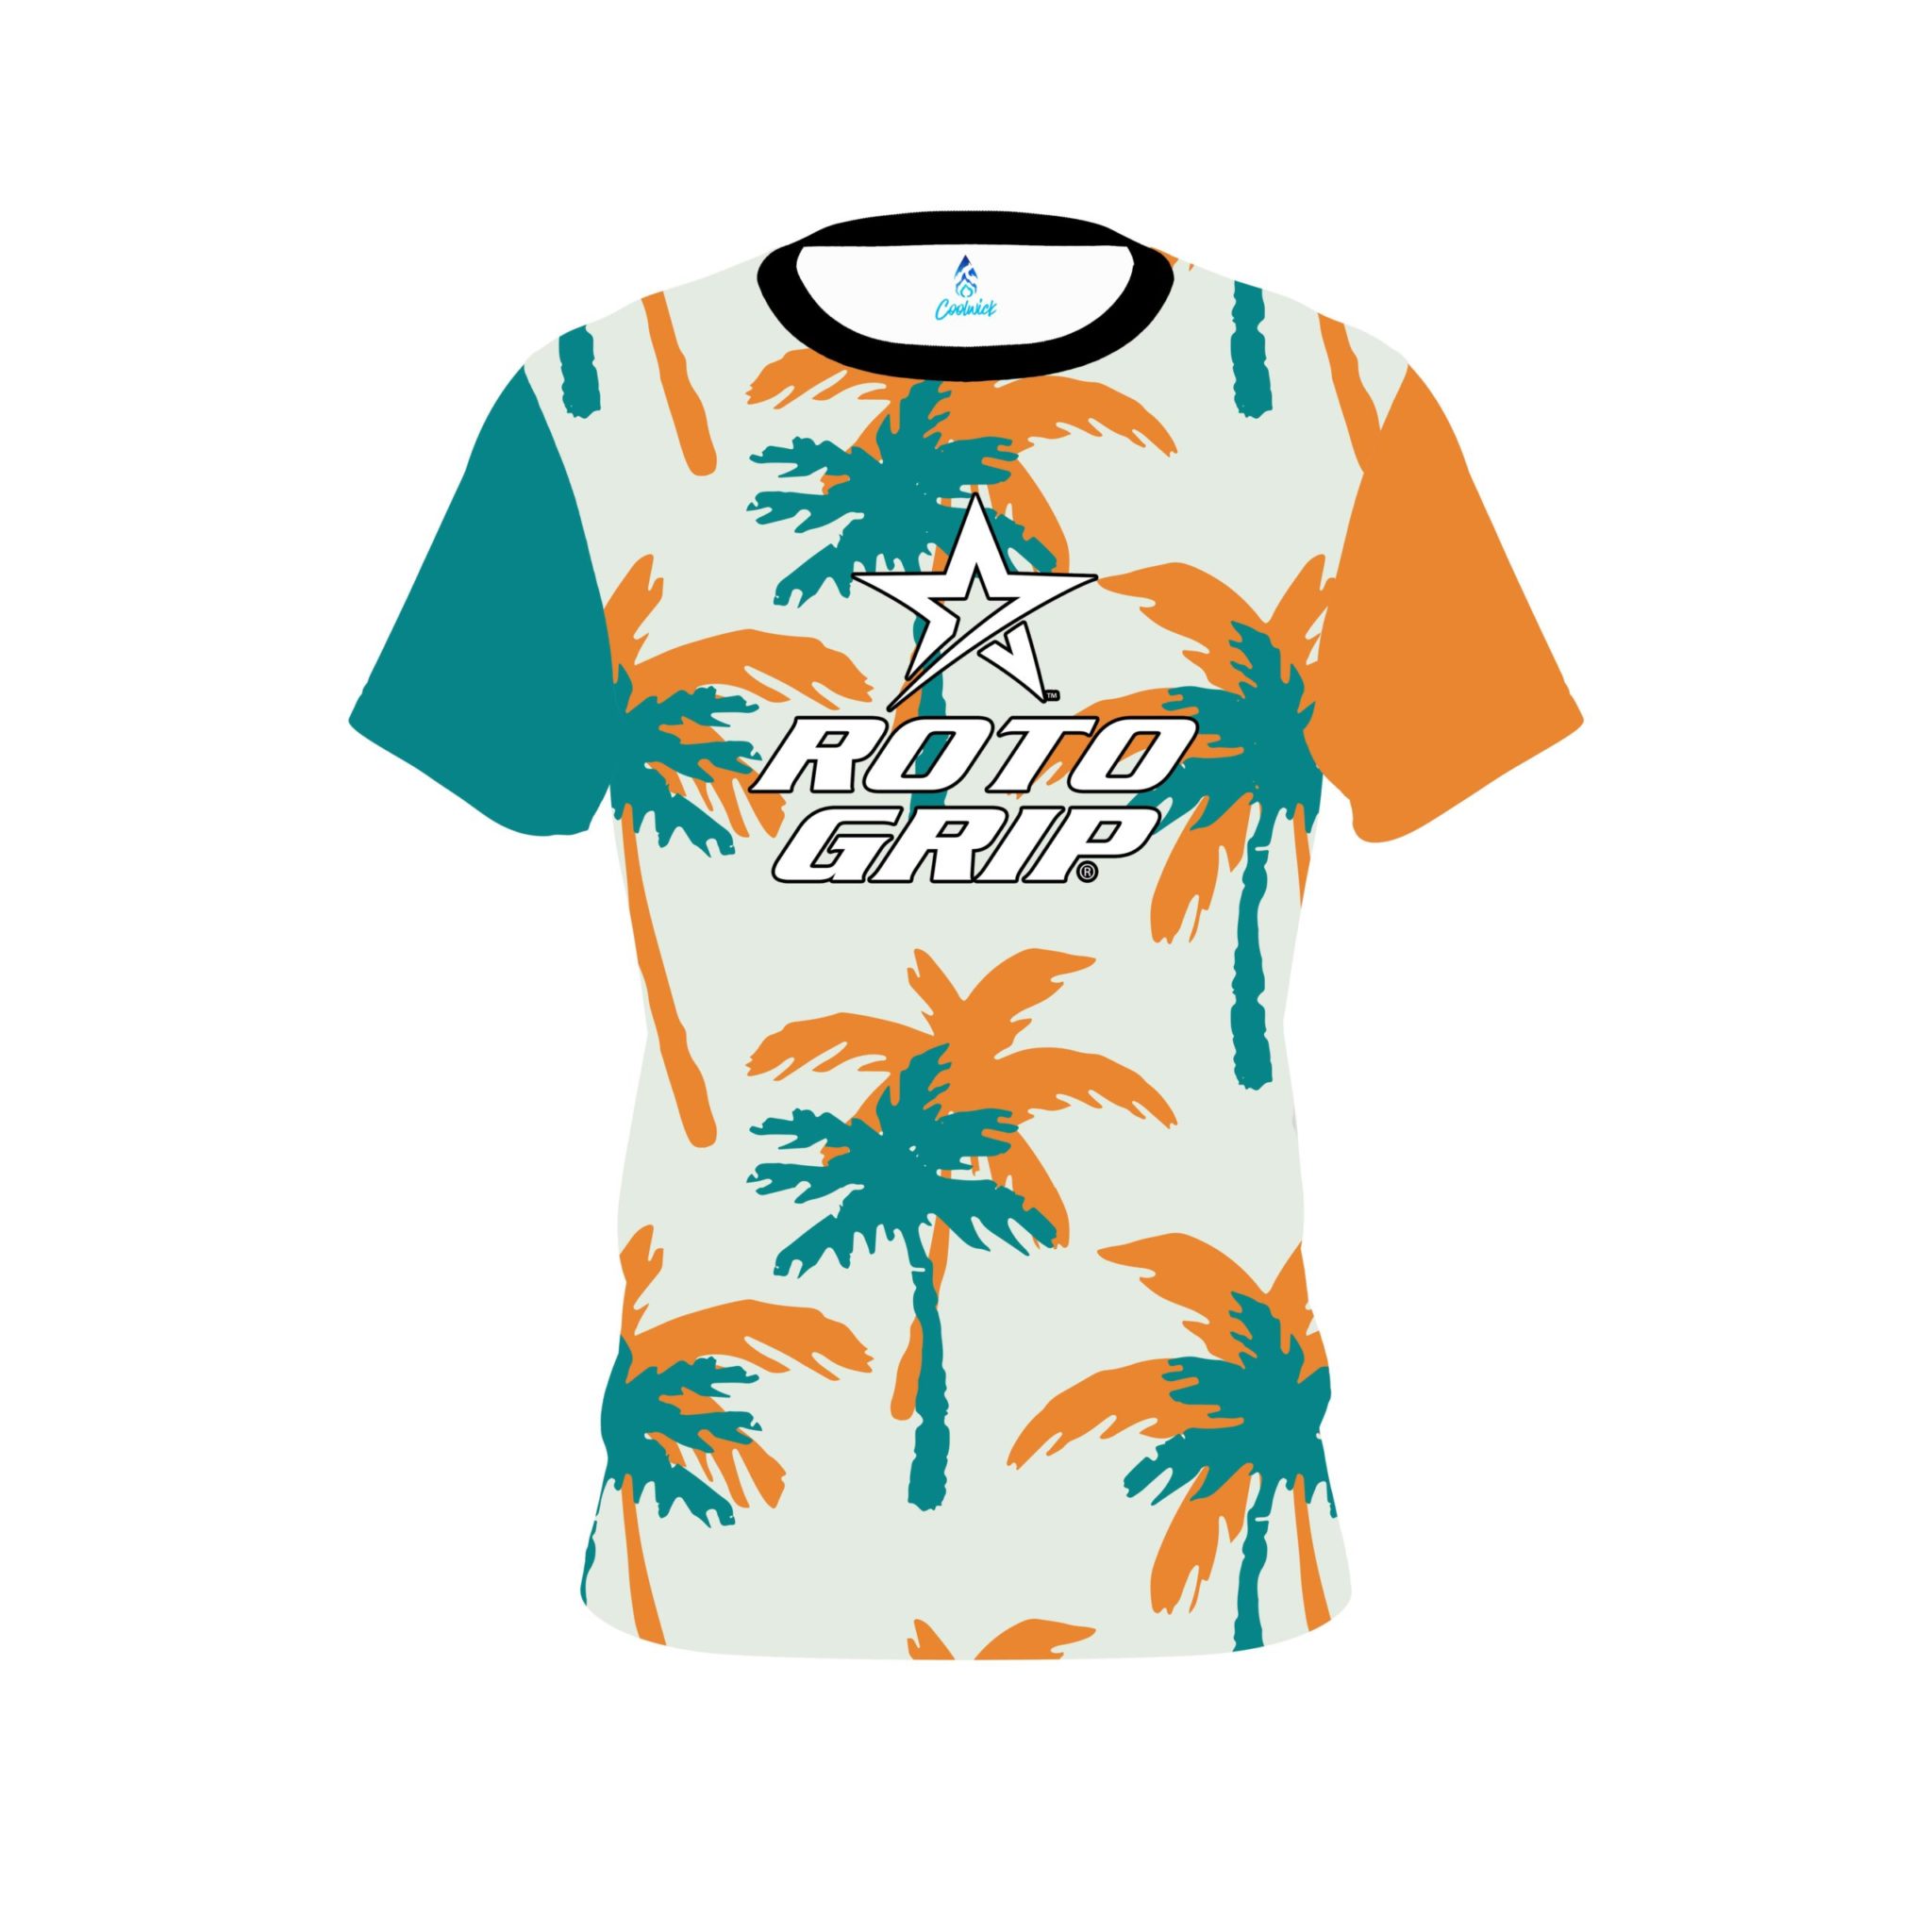 Roto Grip Teal Orange Palm Trees CoolWick Bowling Jersey